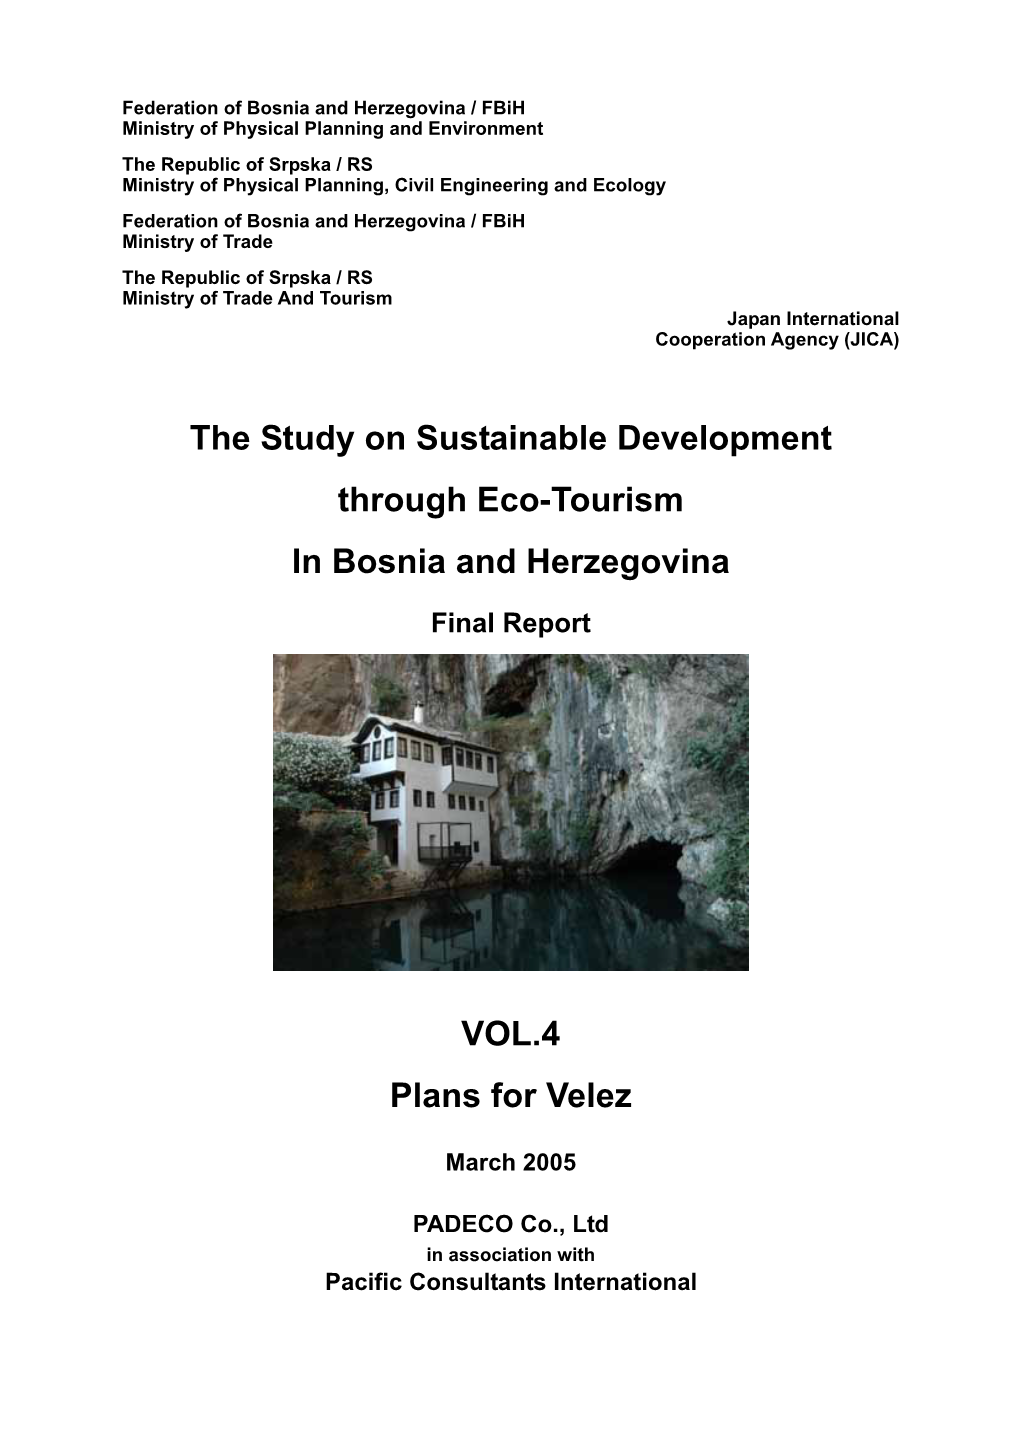 The Study on Sustainable Development Through Eco-Tourism in Bosnia and Herzegovina